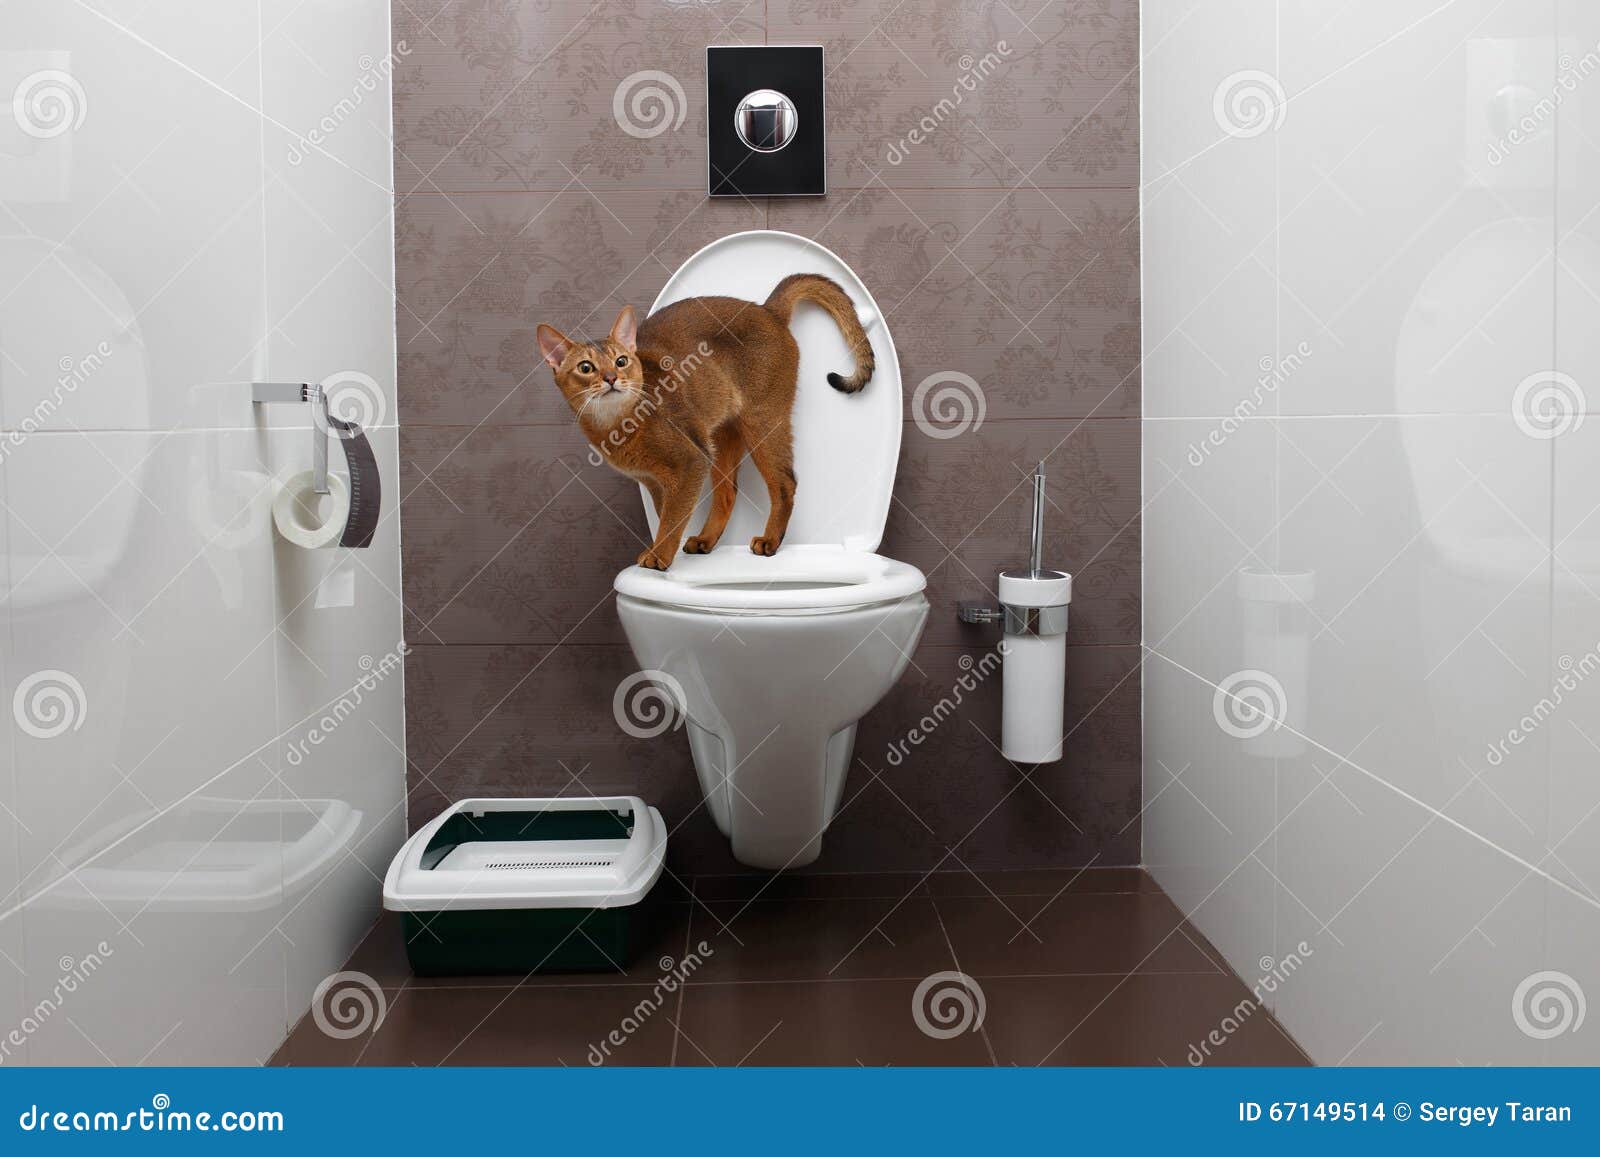 Curious Abyssinian Cat Uses Toilet Bowl Stock Photo Image of